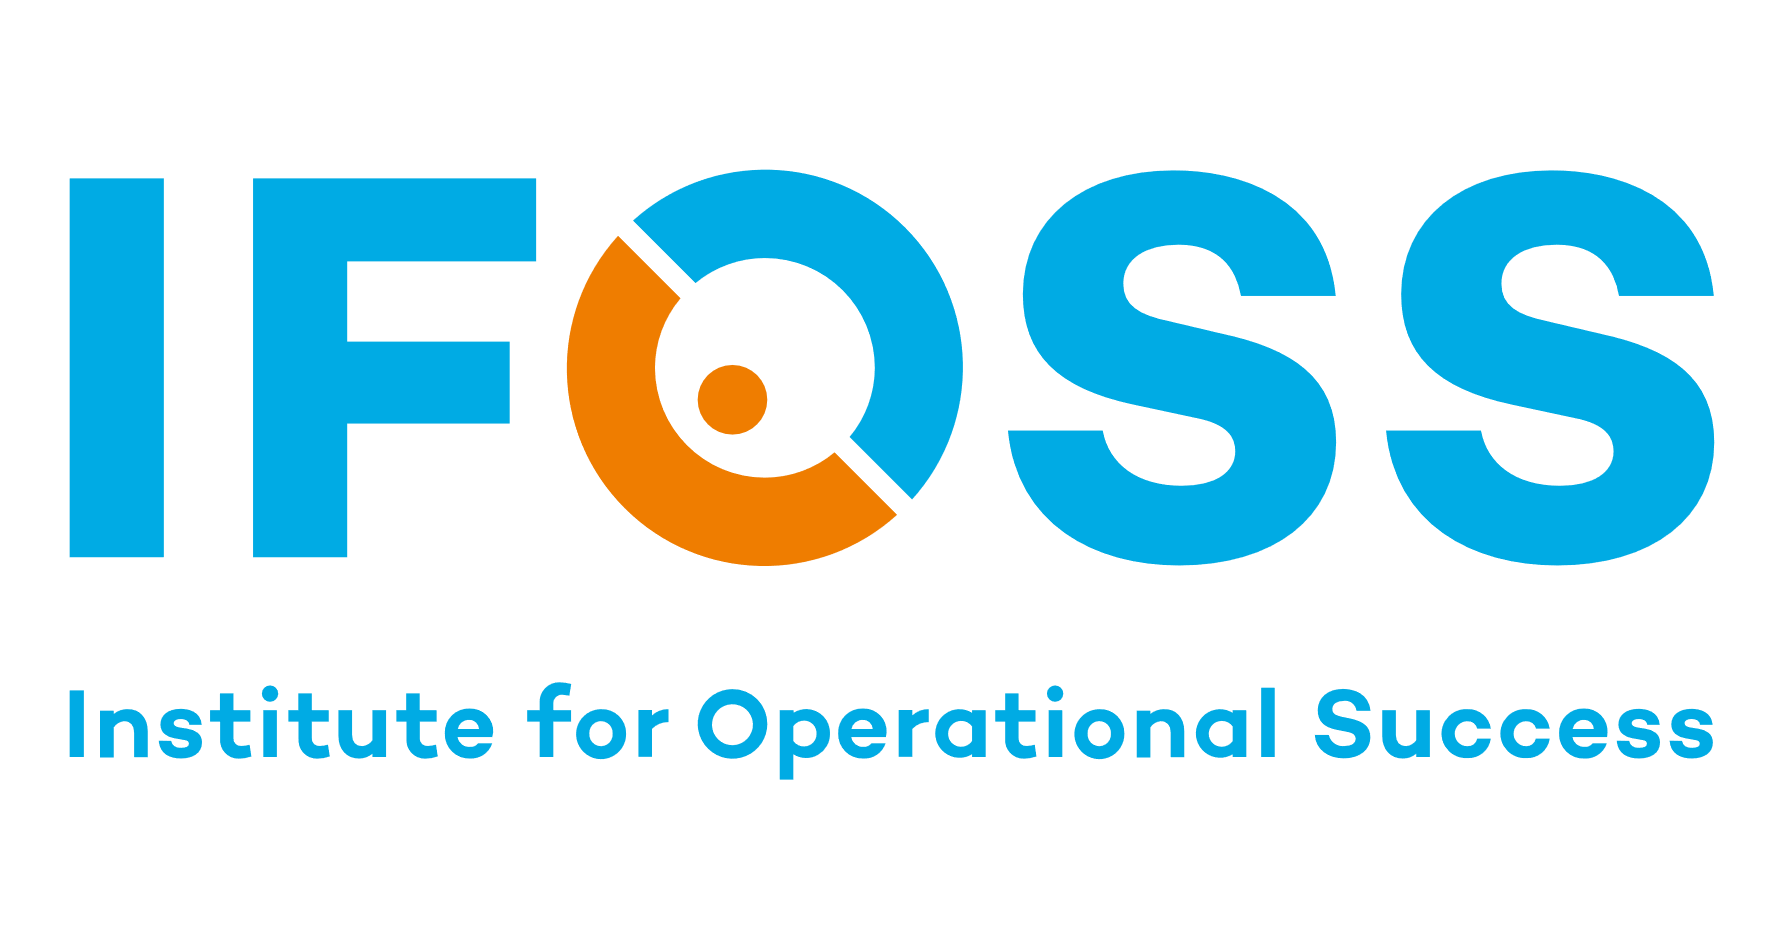 IFOSS - Institute for Operational Success logo